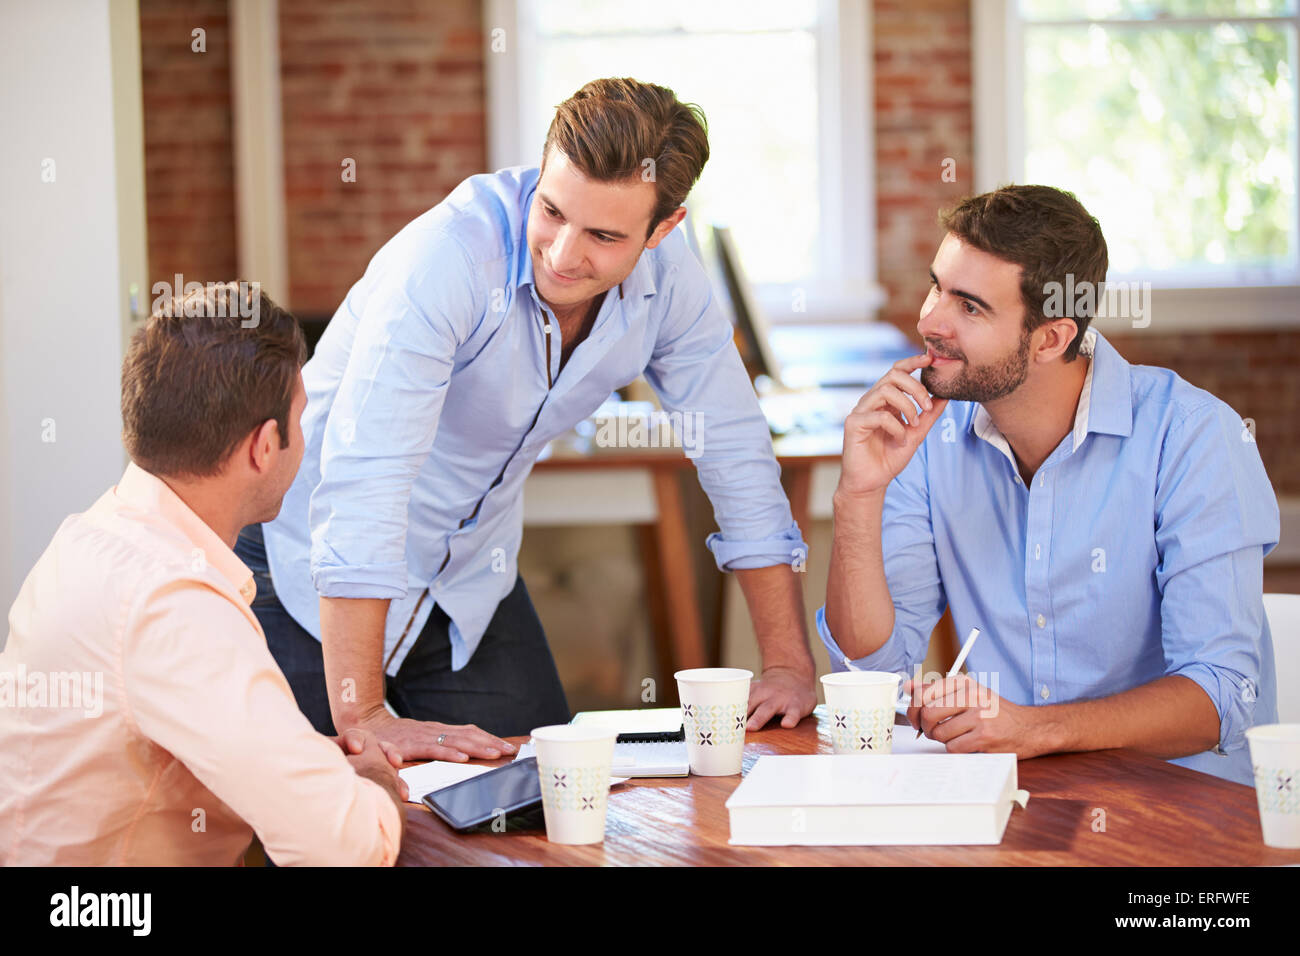 Group Of Businessmen Meeting To Discuss Ideas Stock Photo